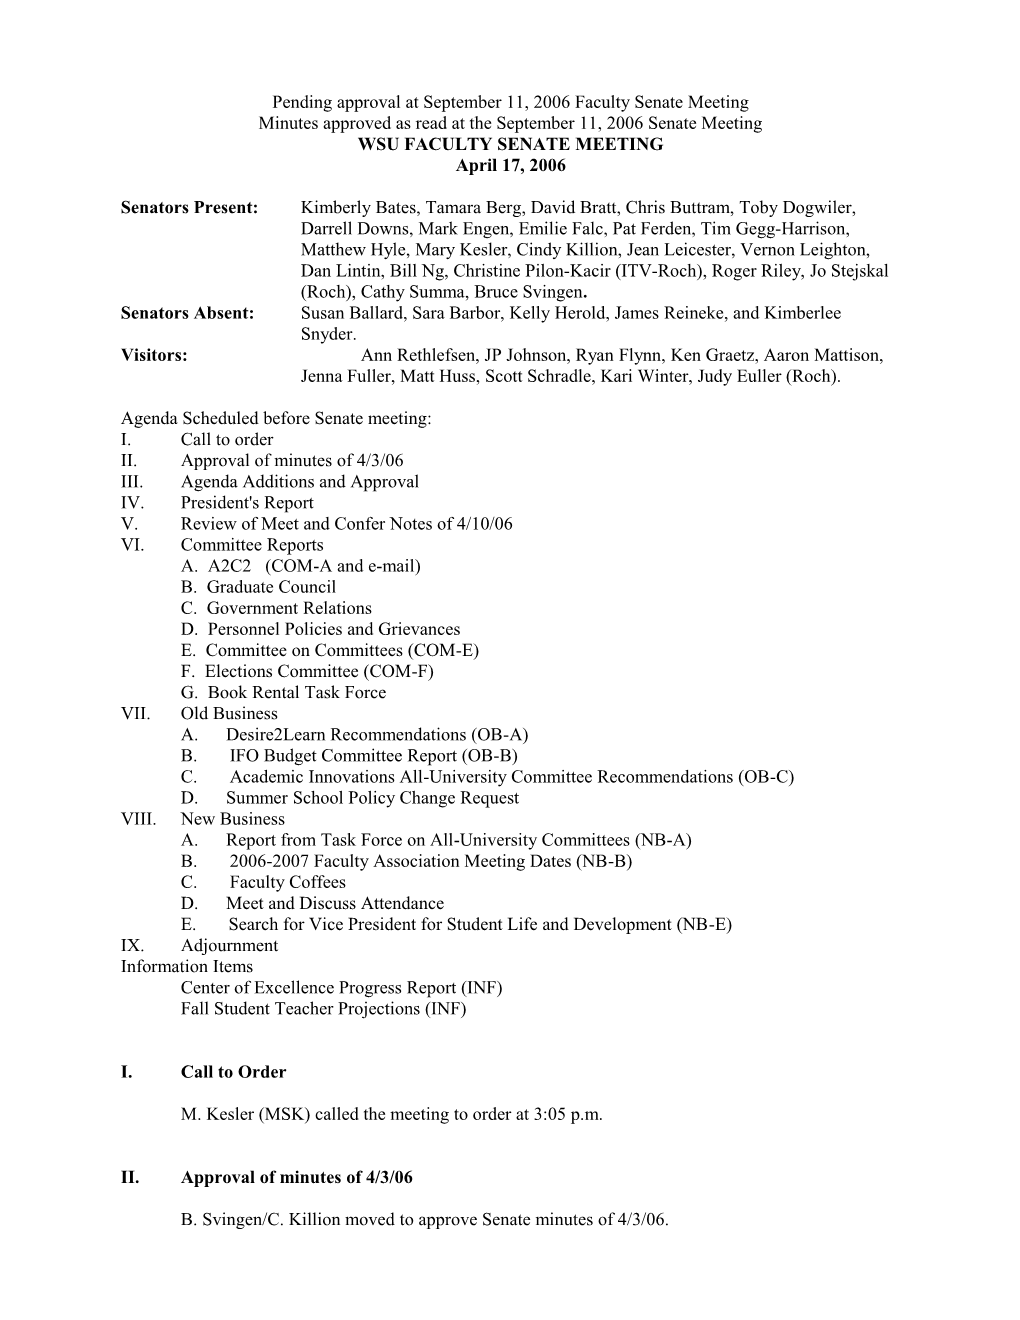 Pending Approval at September 11, 2006 Faculty Senate Meeting